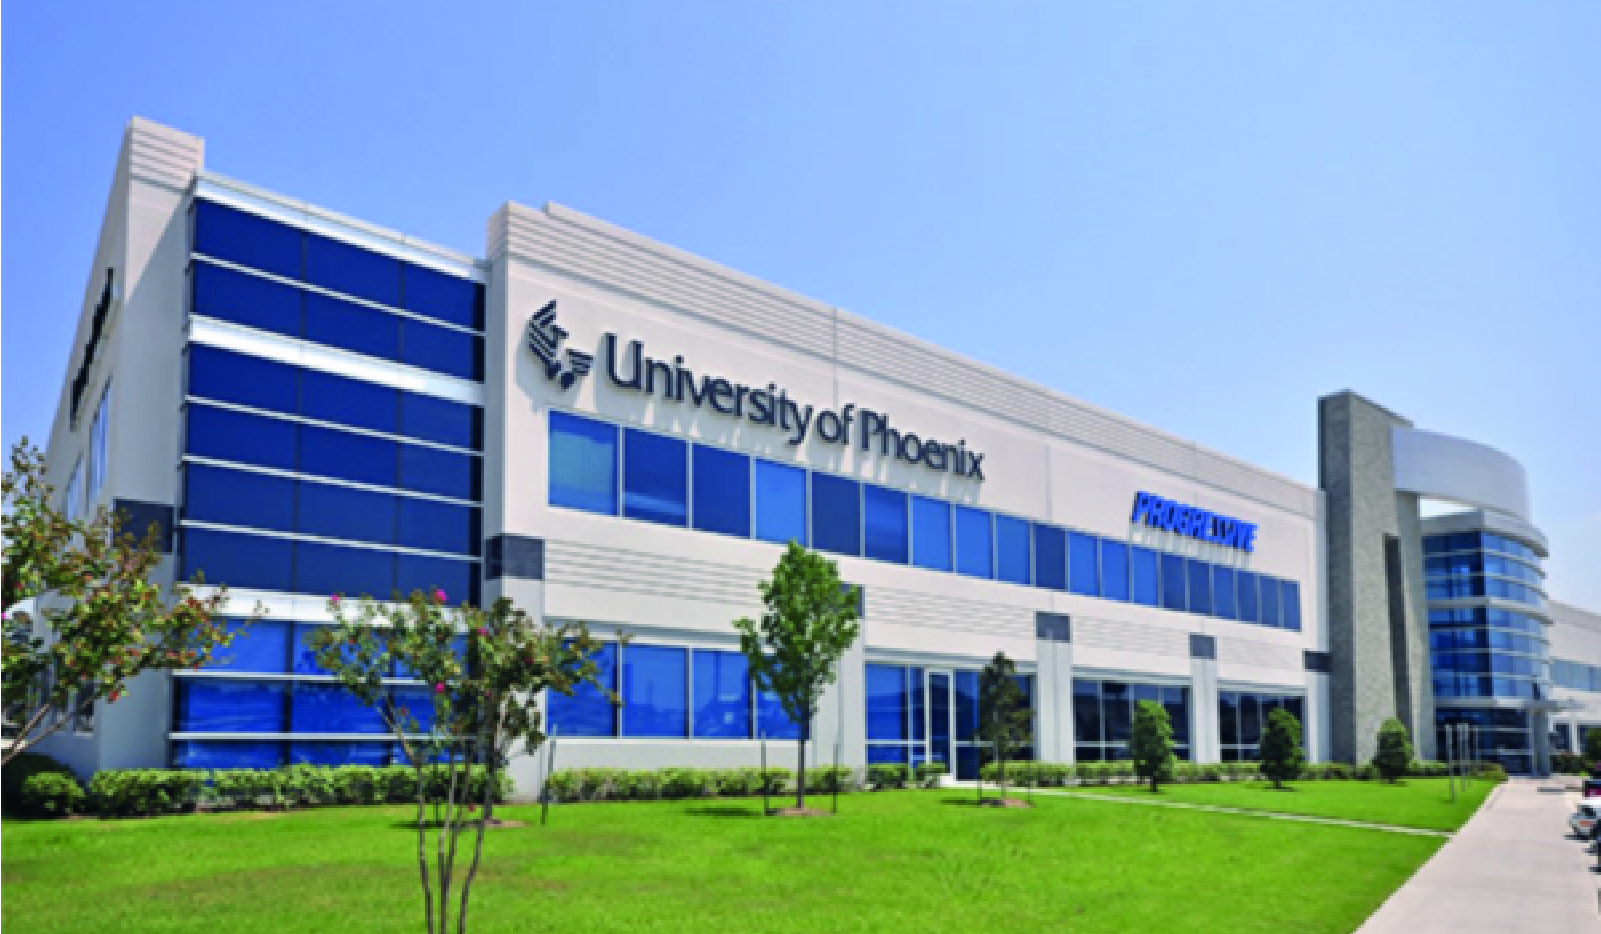 Finding Customers With university of phoenix locations Part A